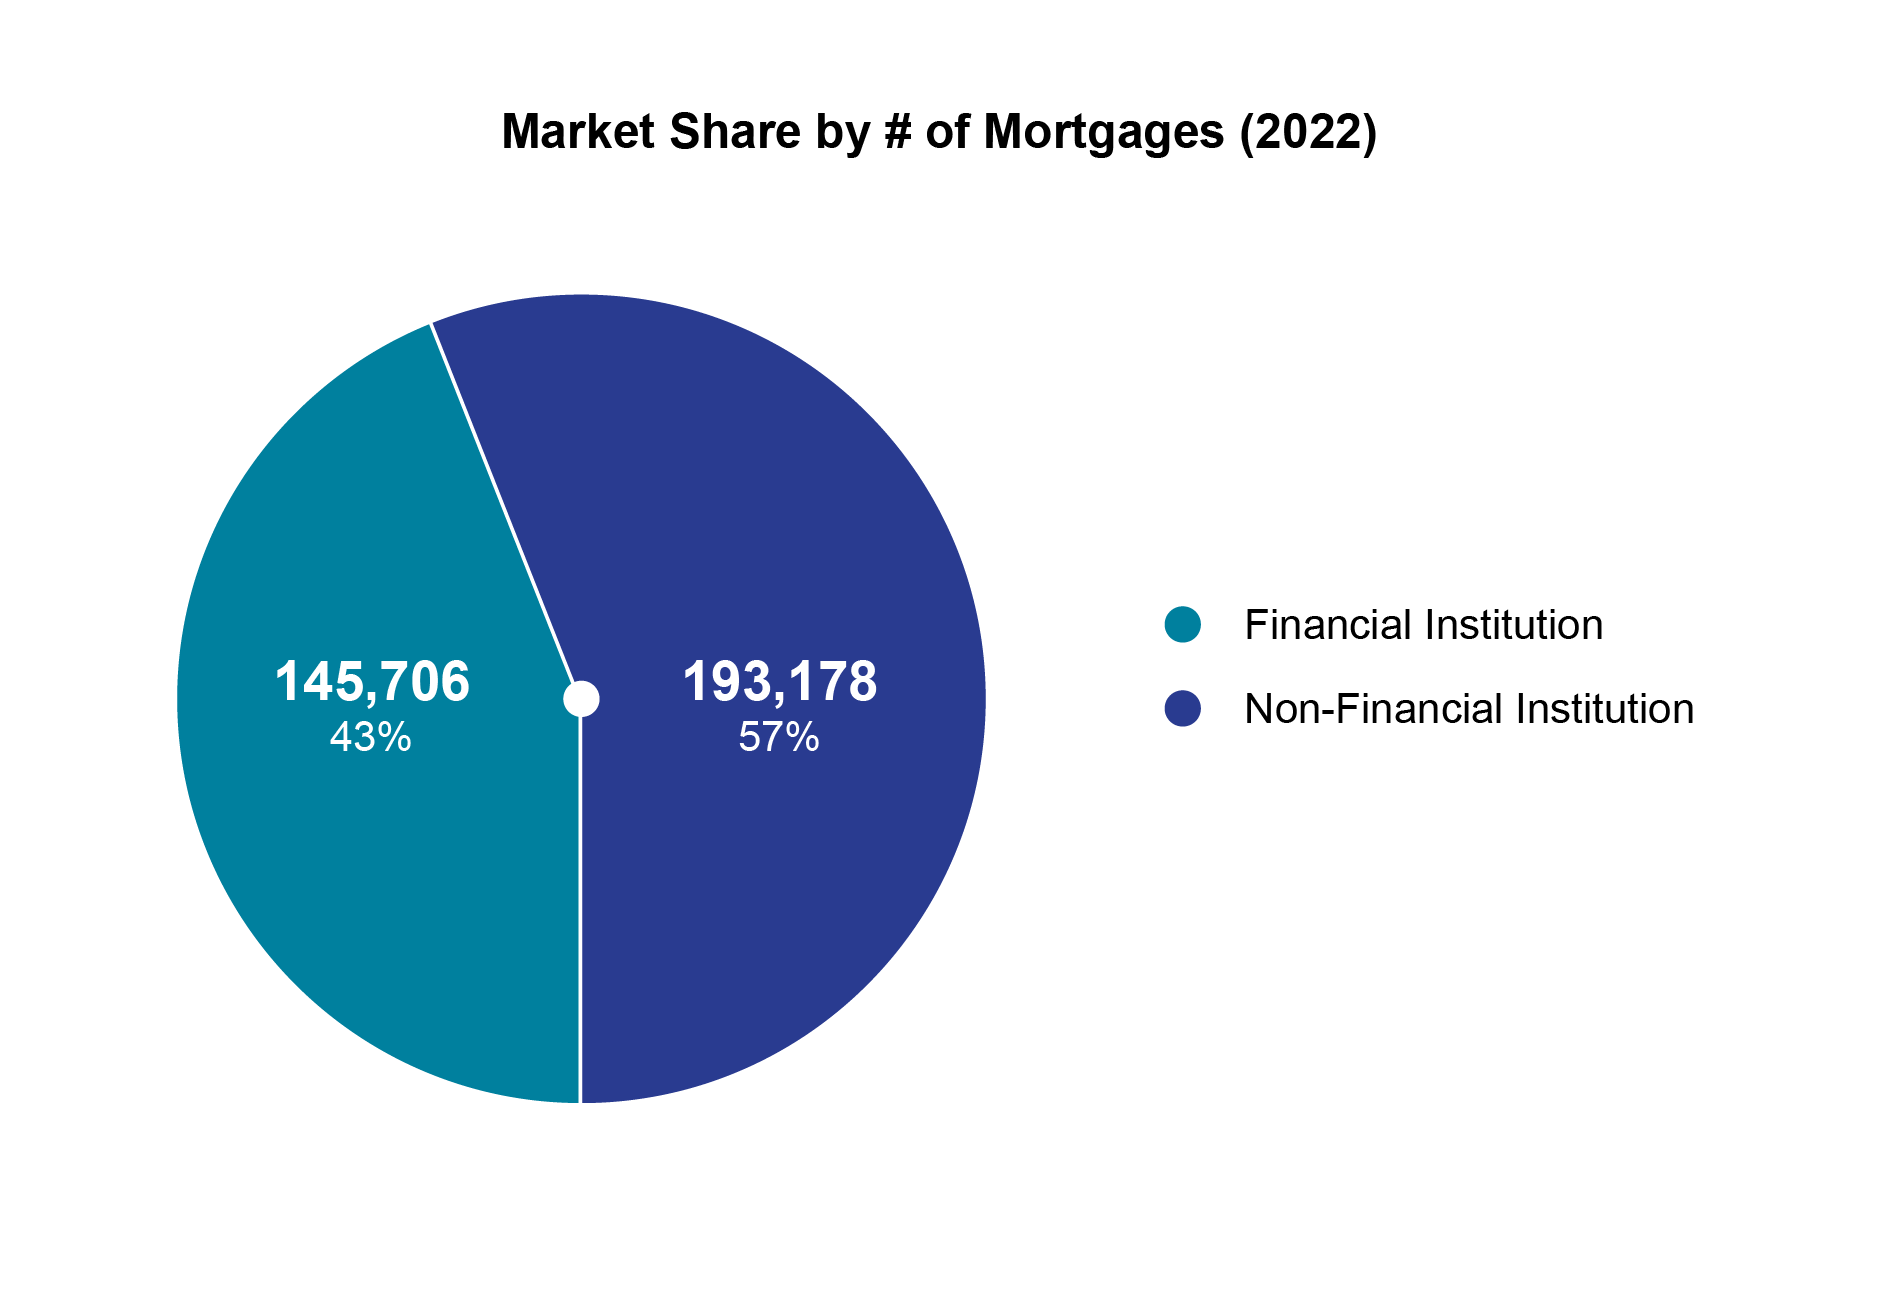 Market Share by Number of Mortgages (2022)